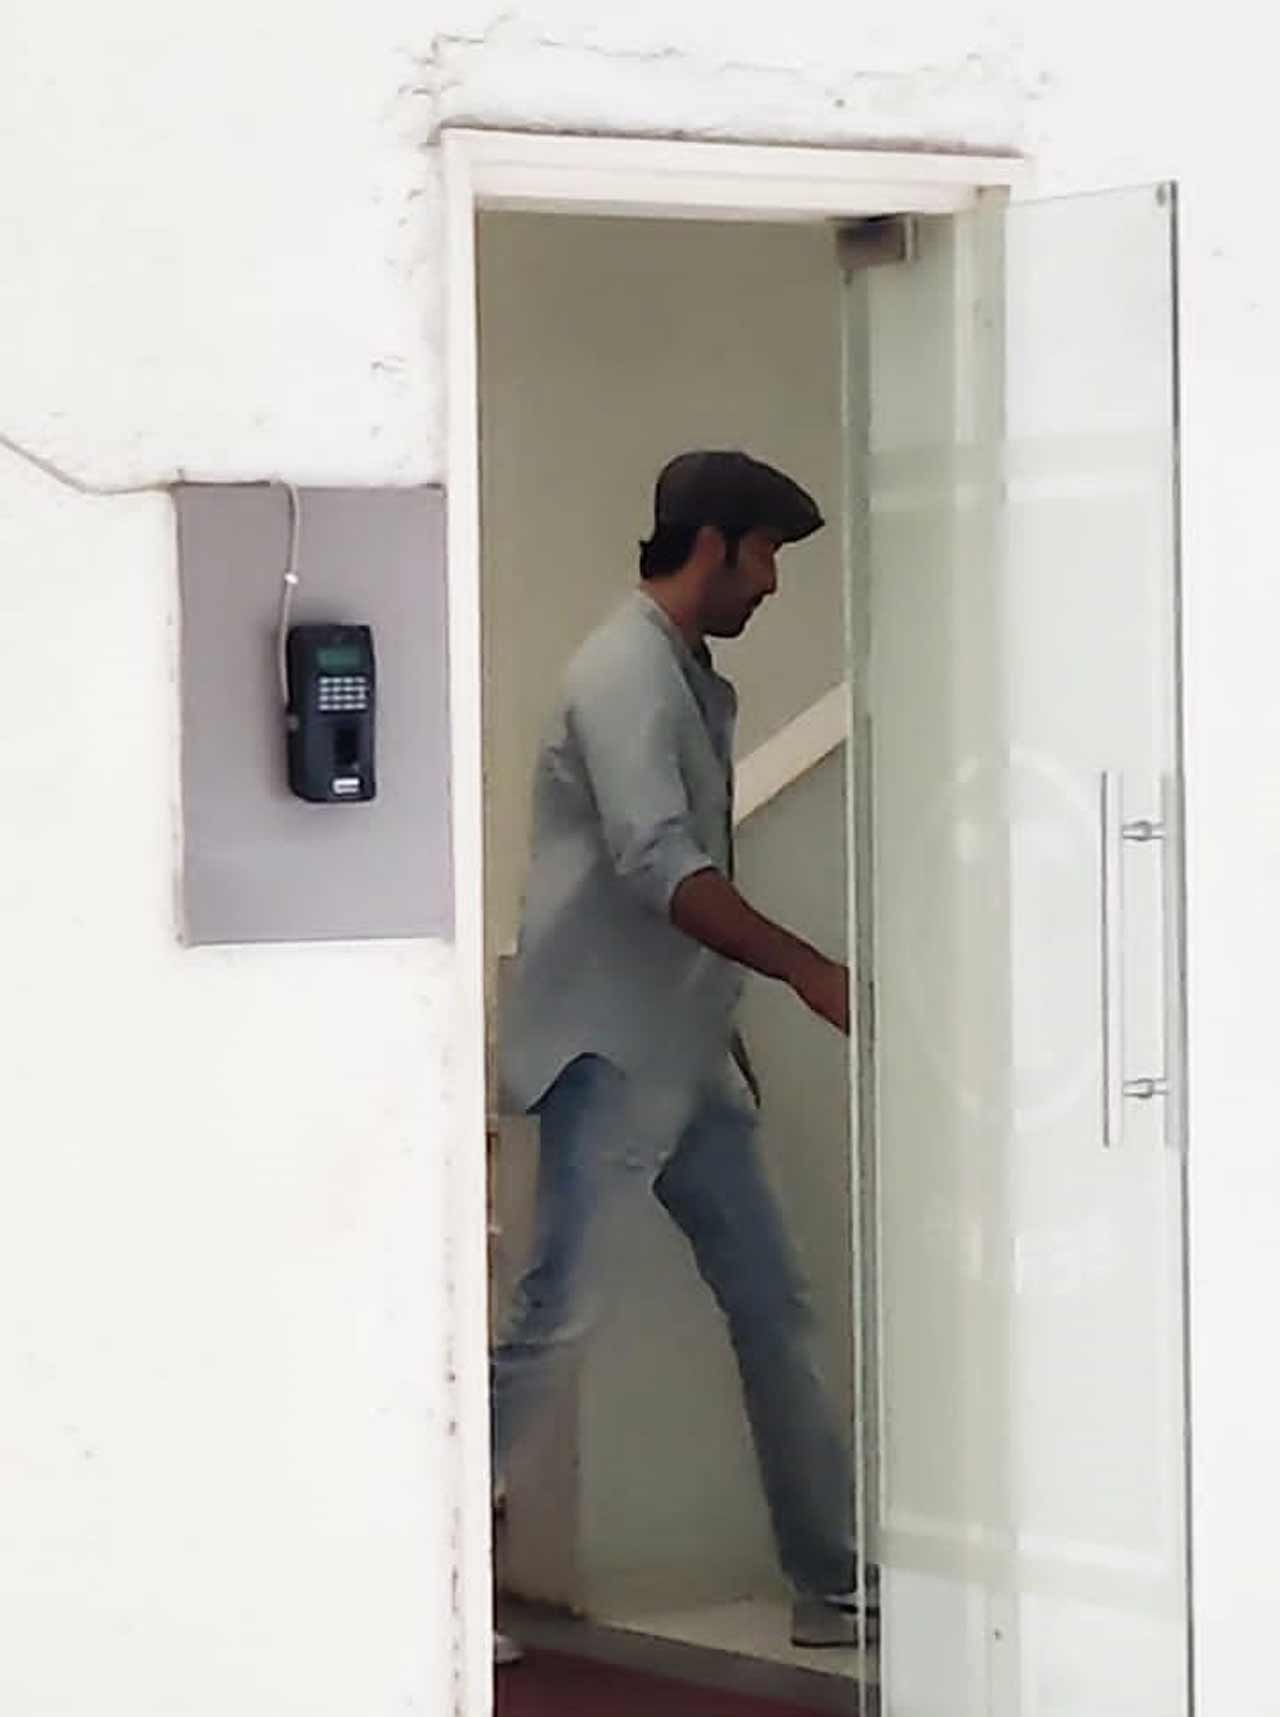 Ranbir Kapoor was snapped strolling in the city ahead of his rumoured wedding with Alia Bhatt in Mumbai. The actor also made a salon visit in Khar later in the day. Ever since the wedding rumours have surfaced online, the entire family is seen playing hide-and-seek from the paparazzi.